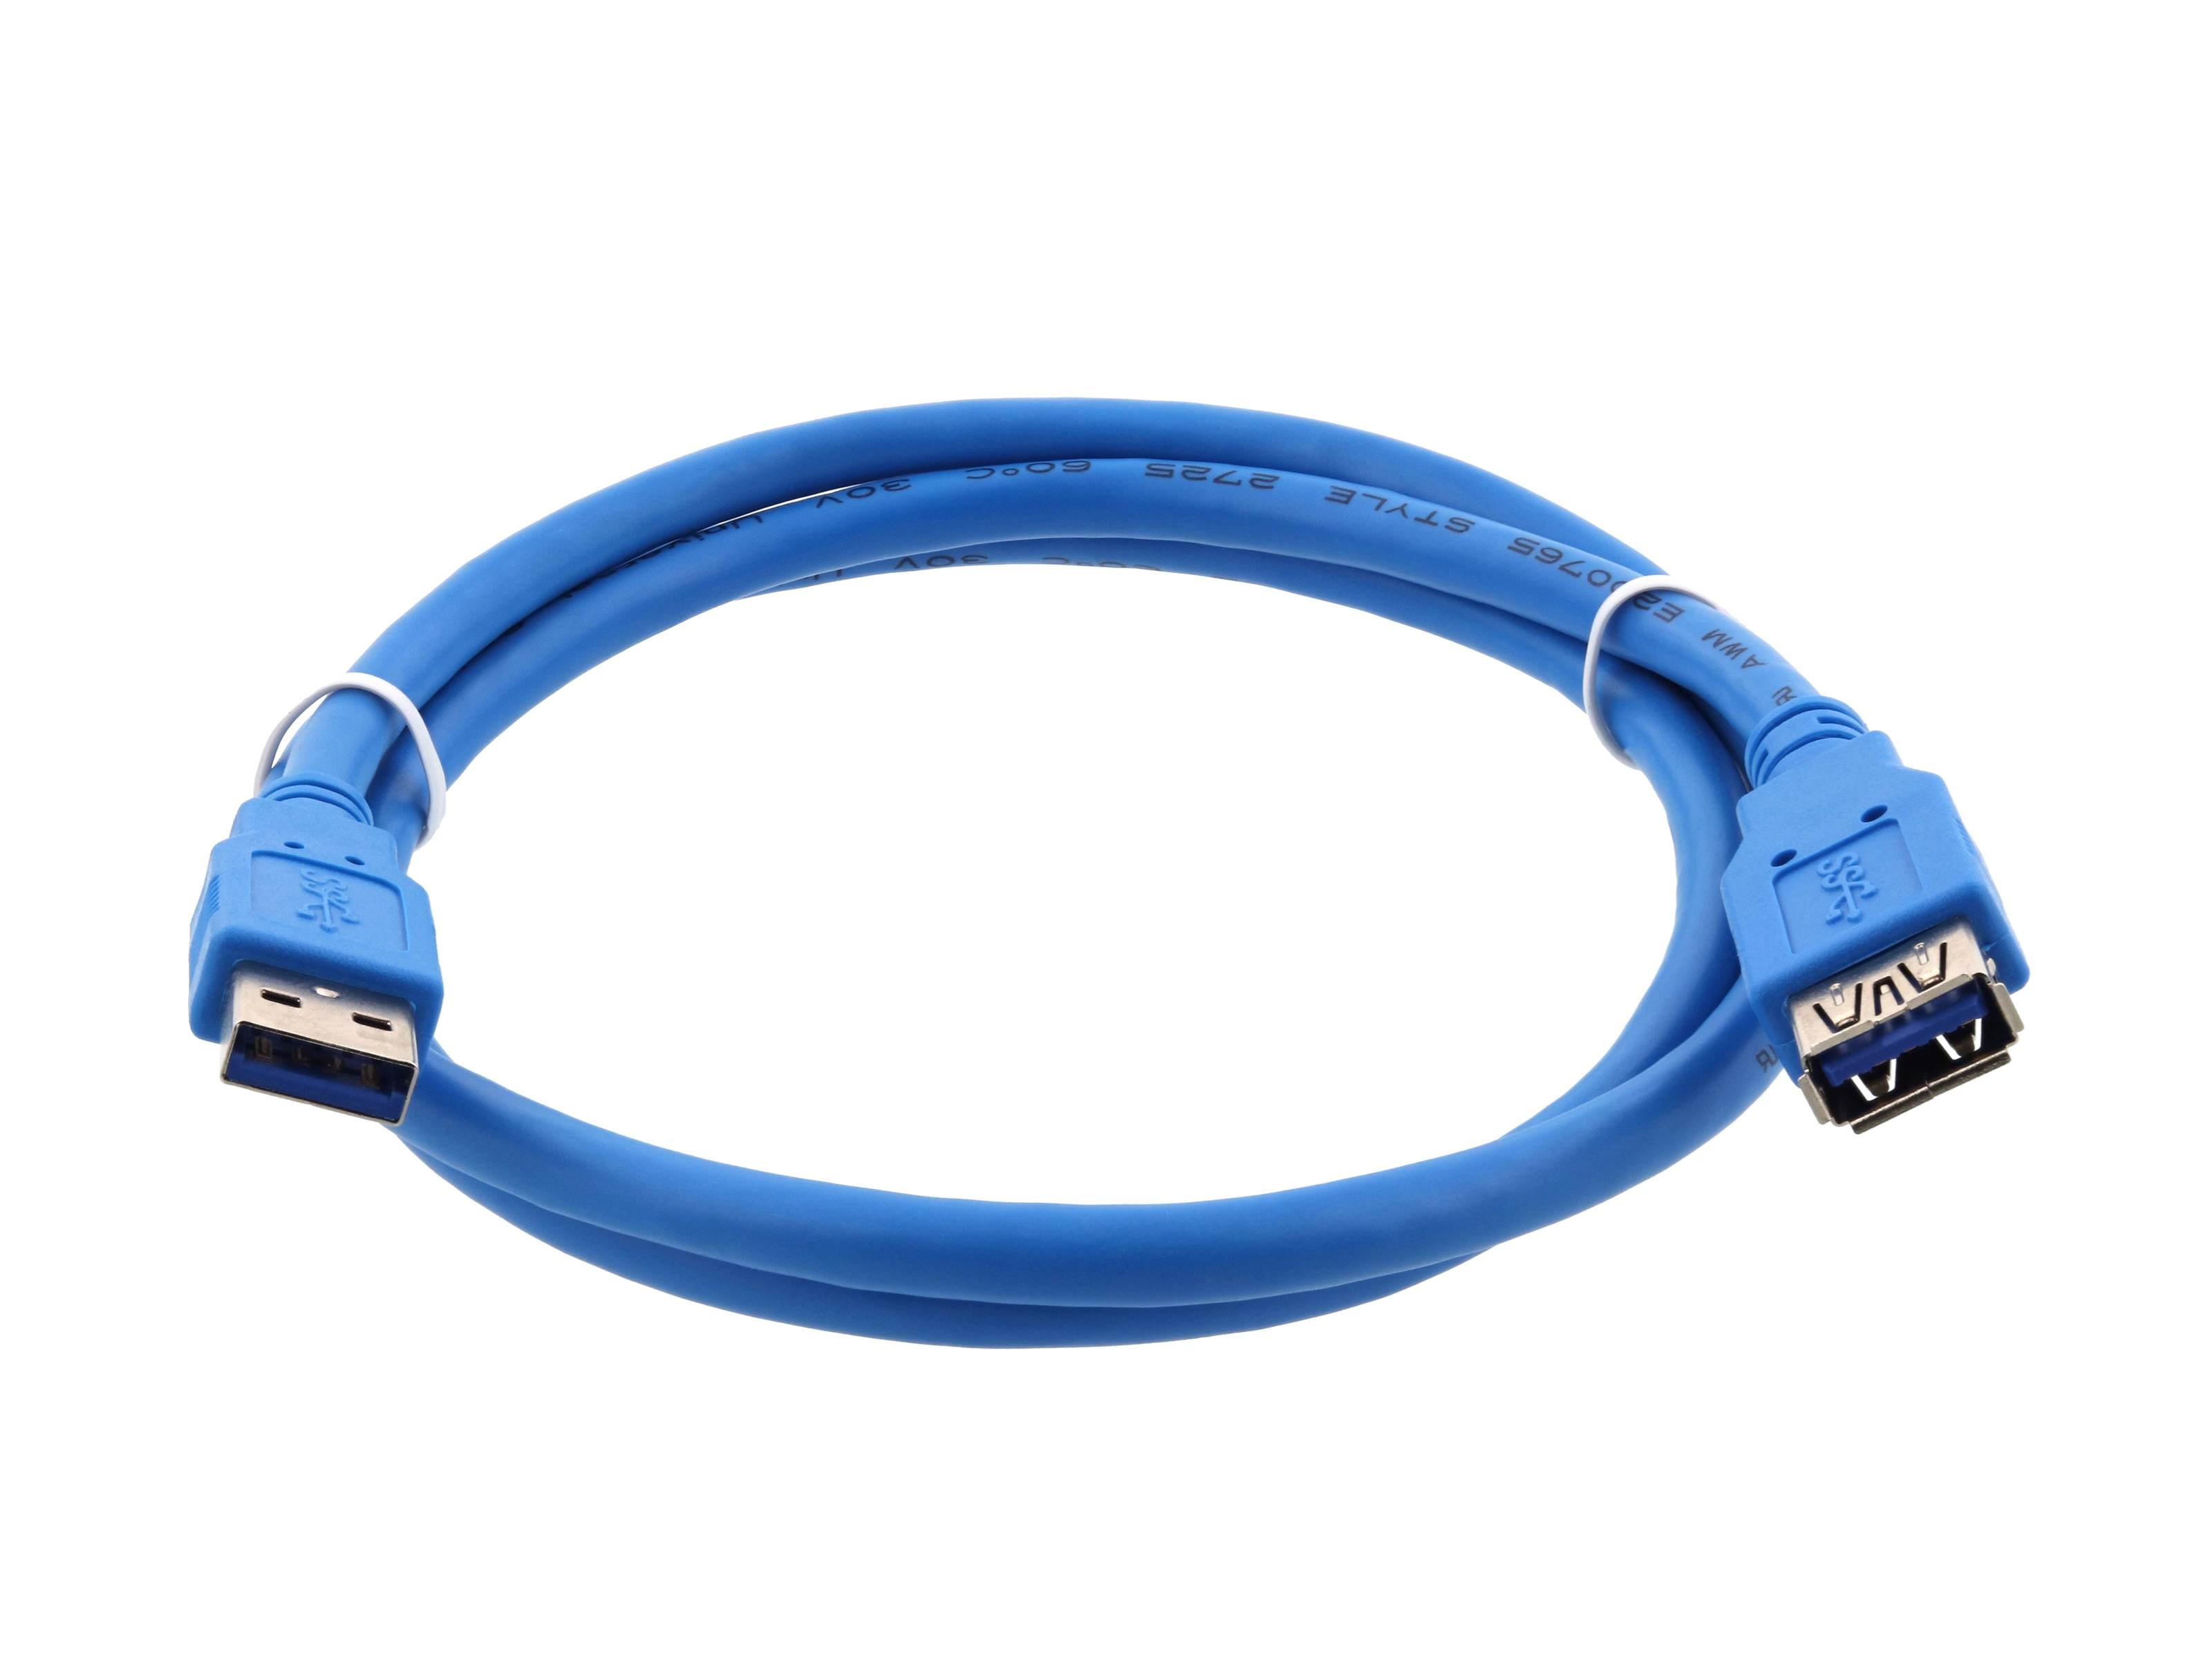 Networx USB 3.0 SuperSpeed Cable A to A M/F 6FT 